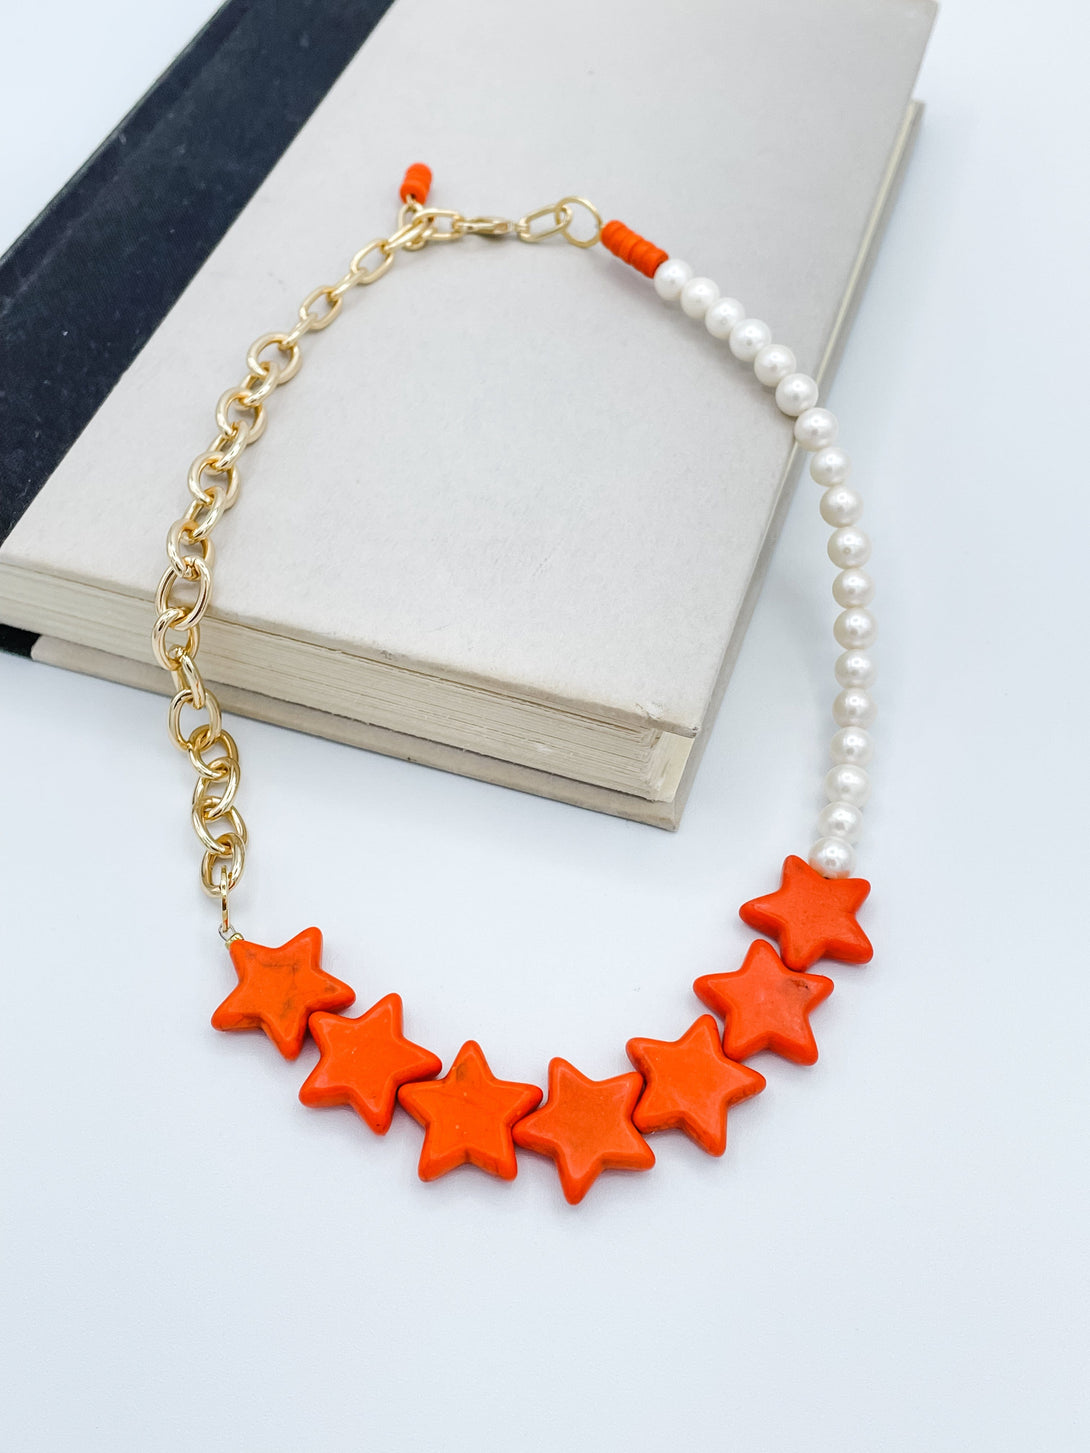 Seven Orange Star Necklace with Gold Chain and Pearls